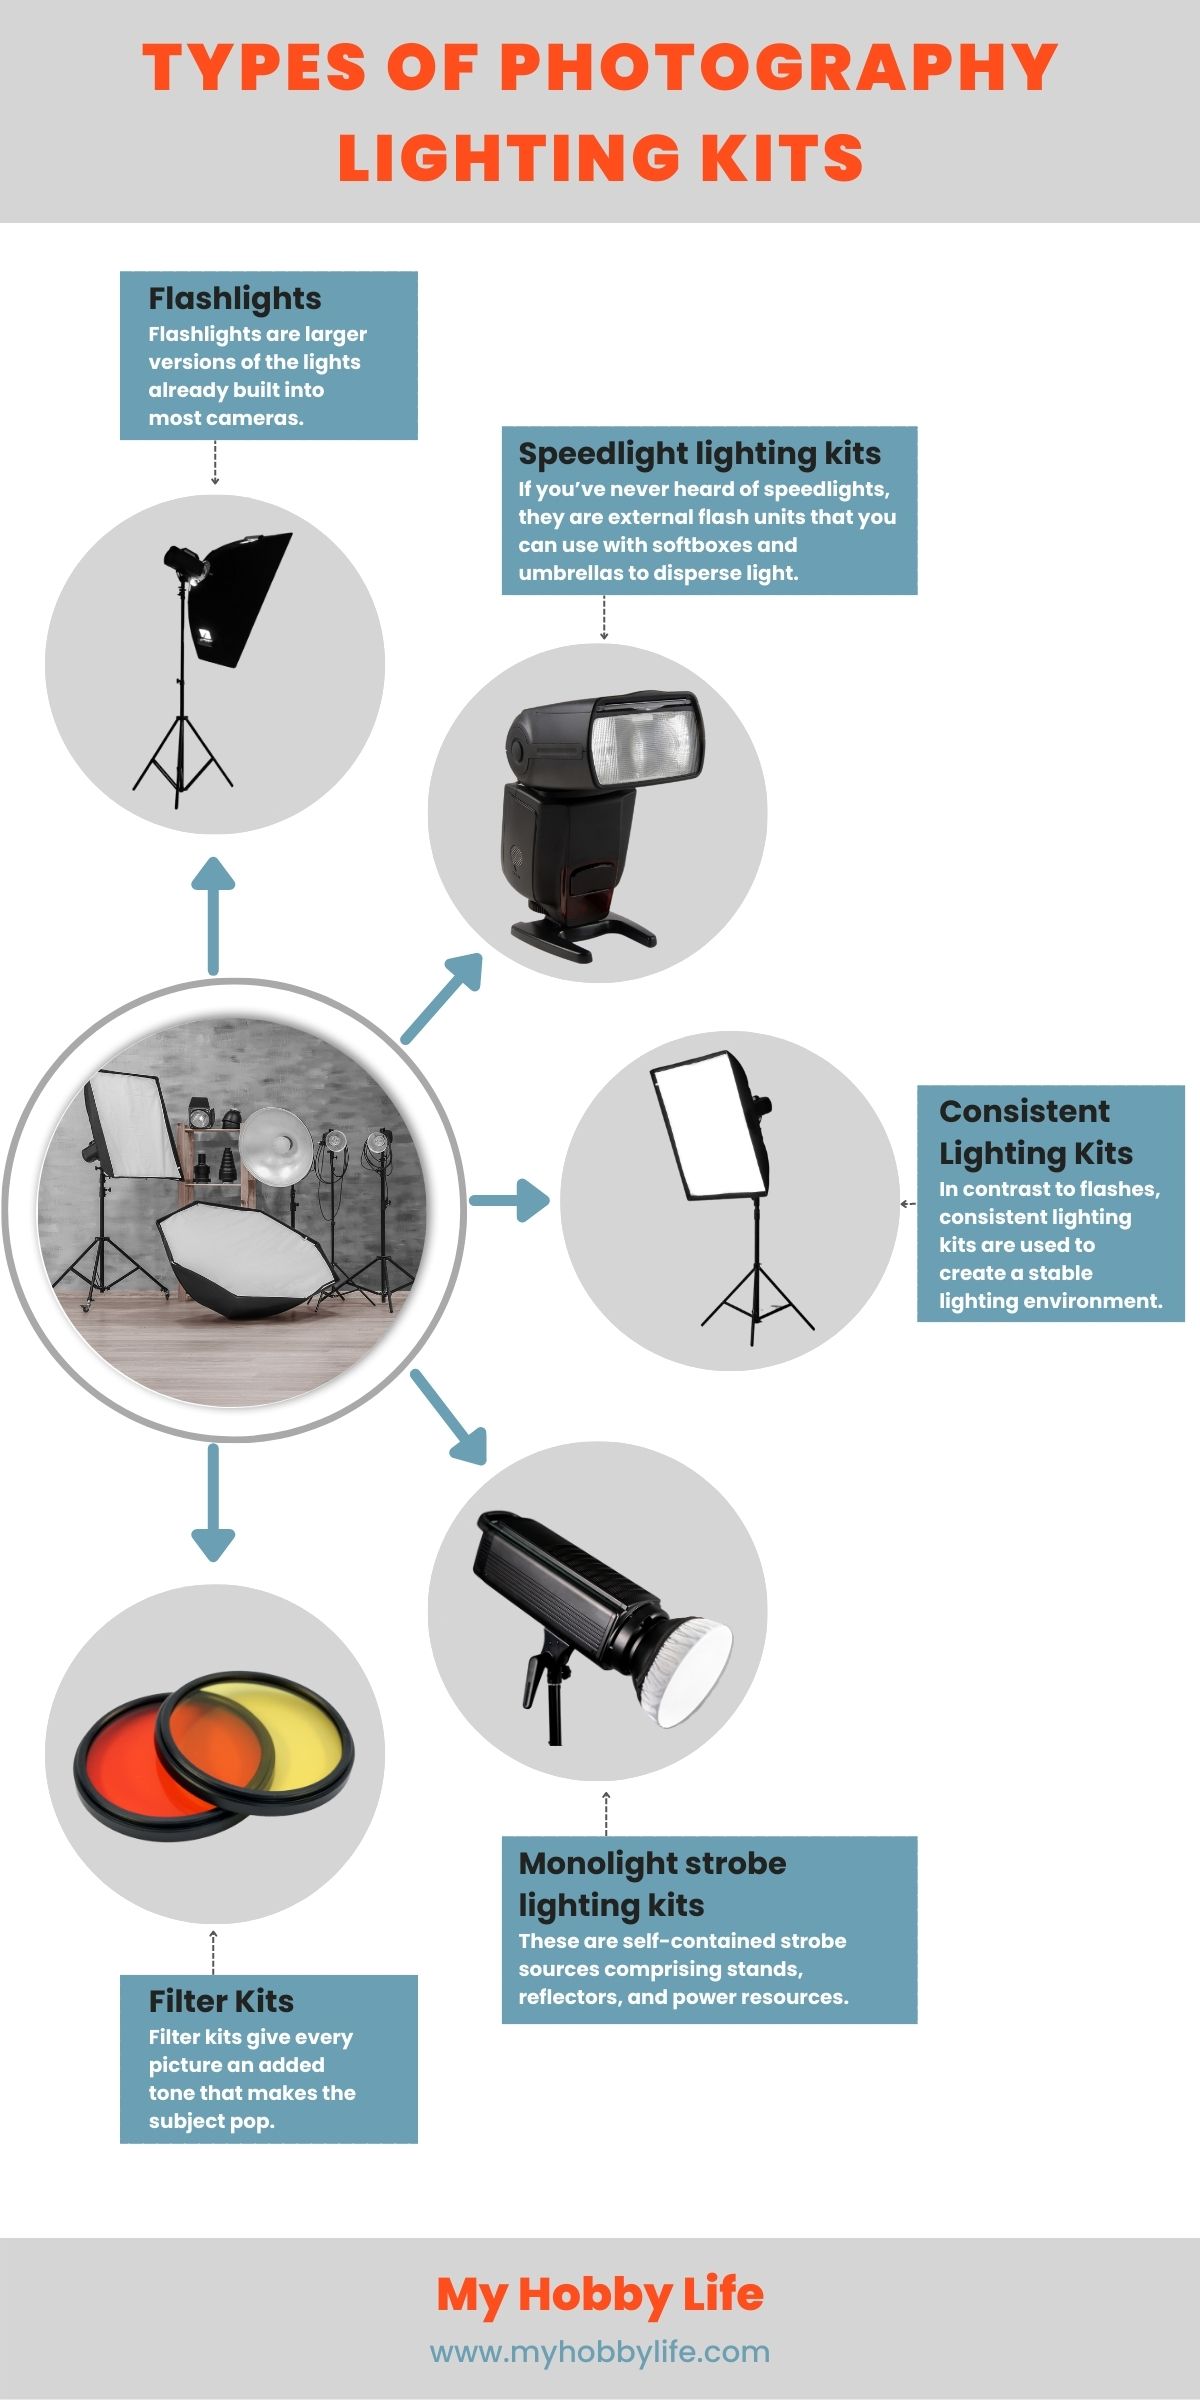 Why You Must Know Different Lighting Kits